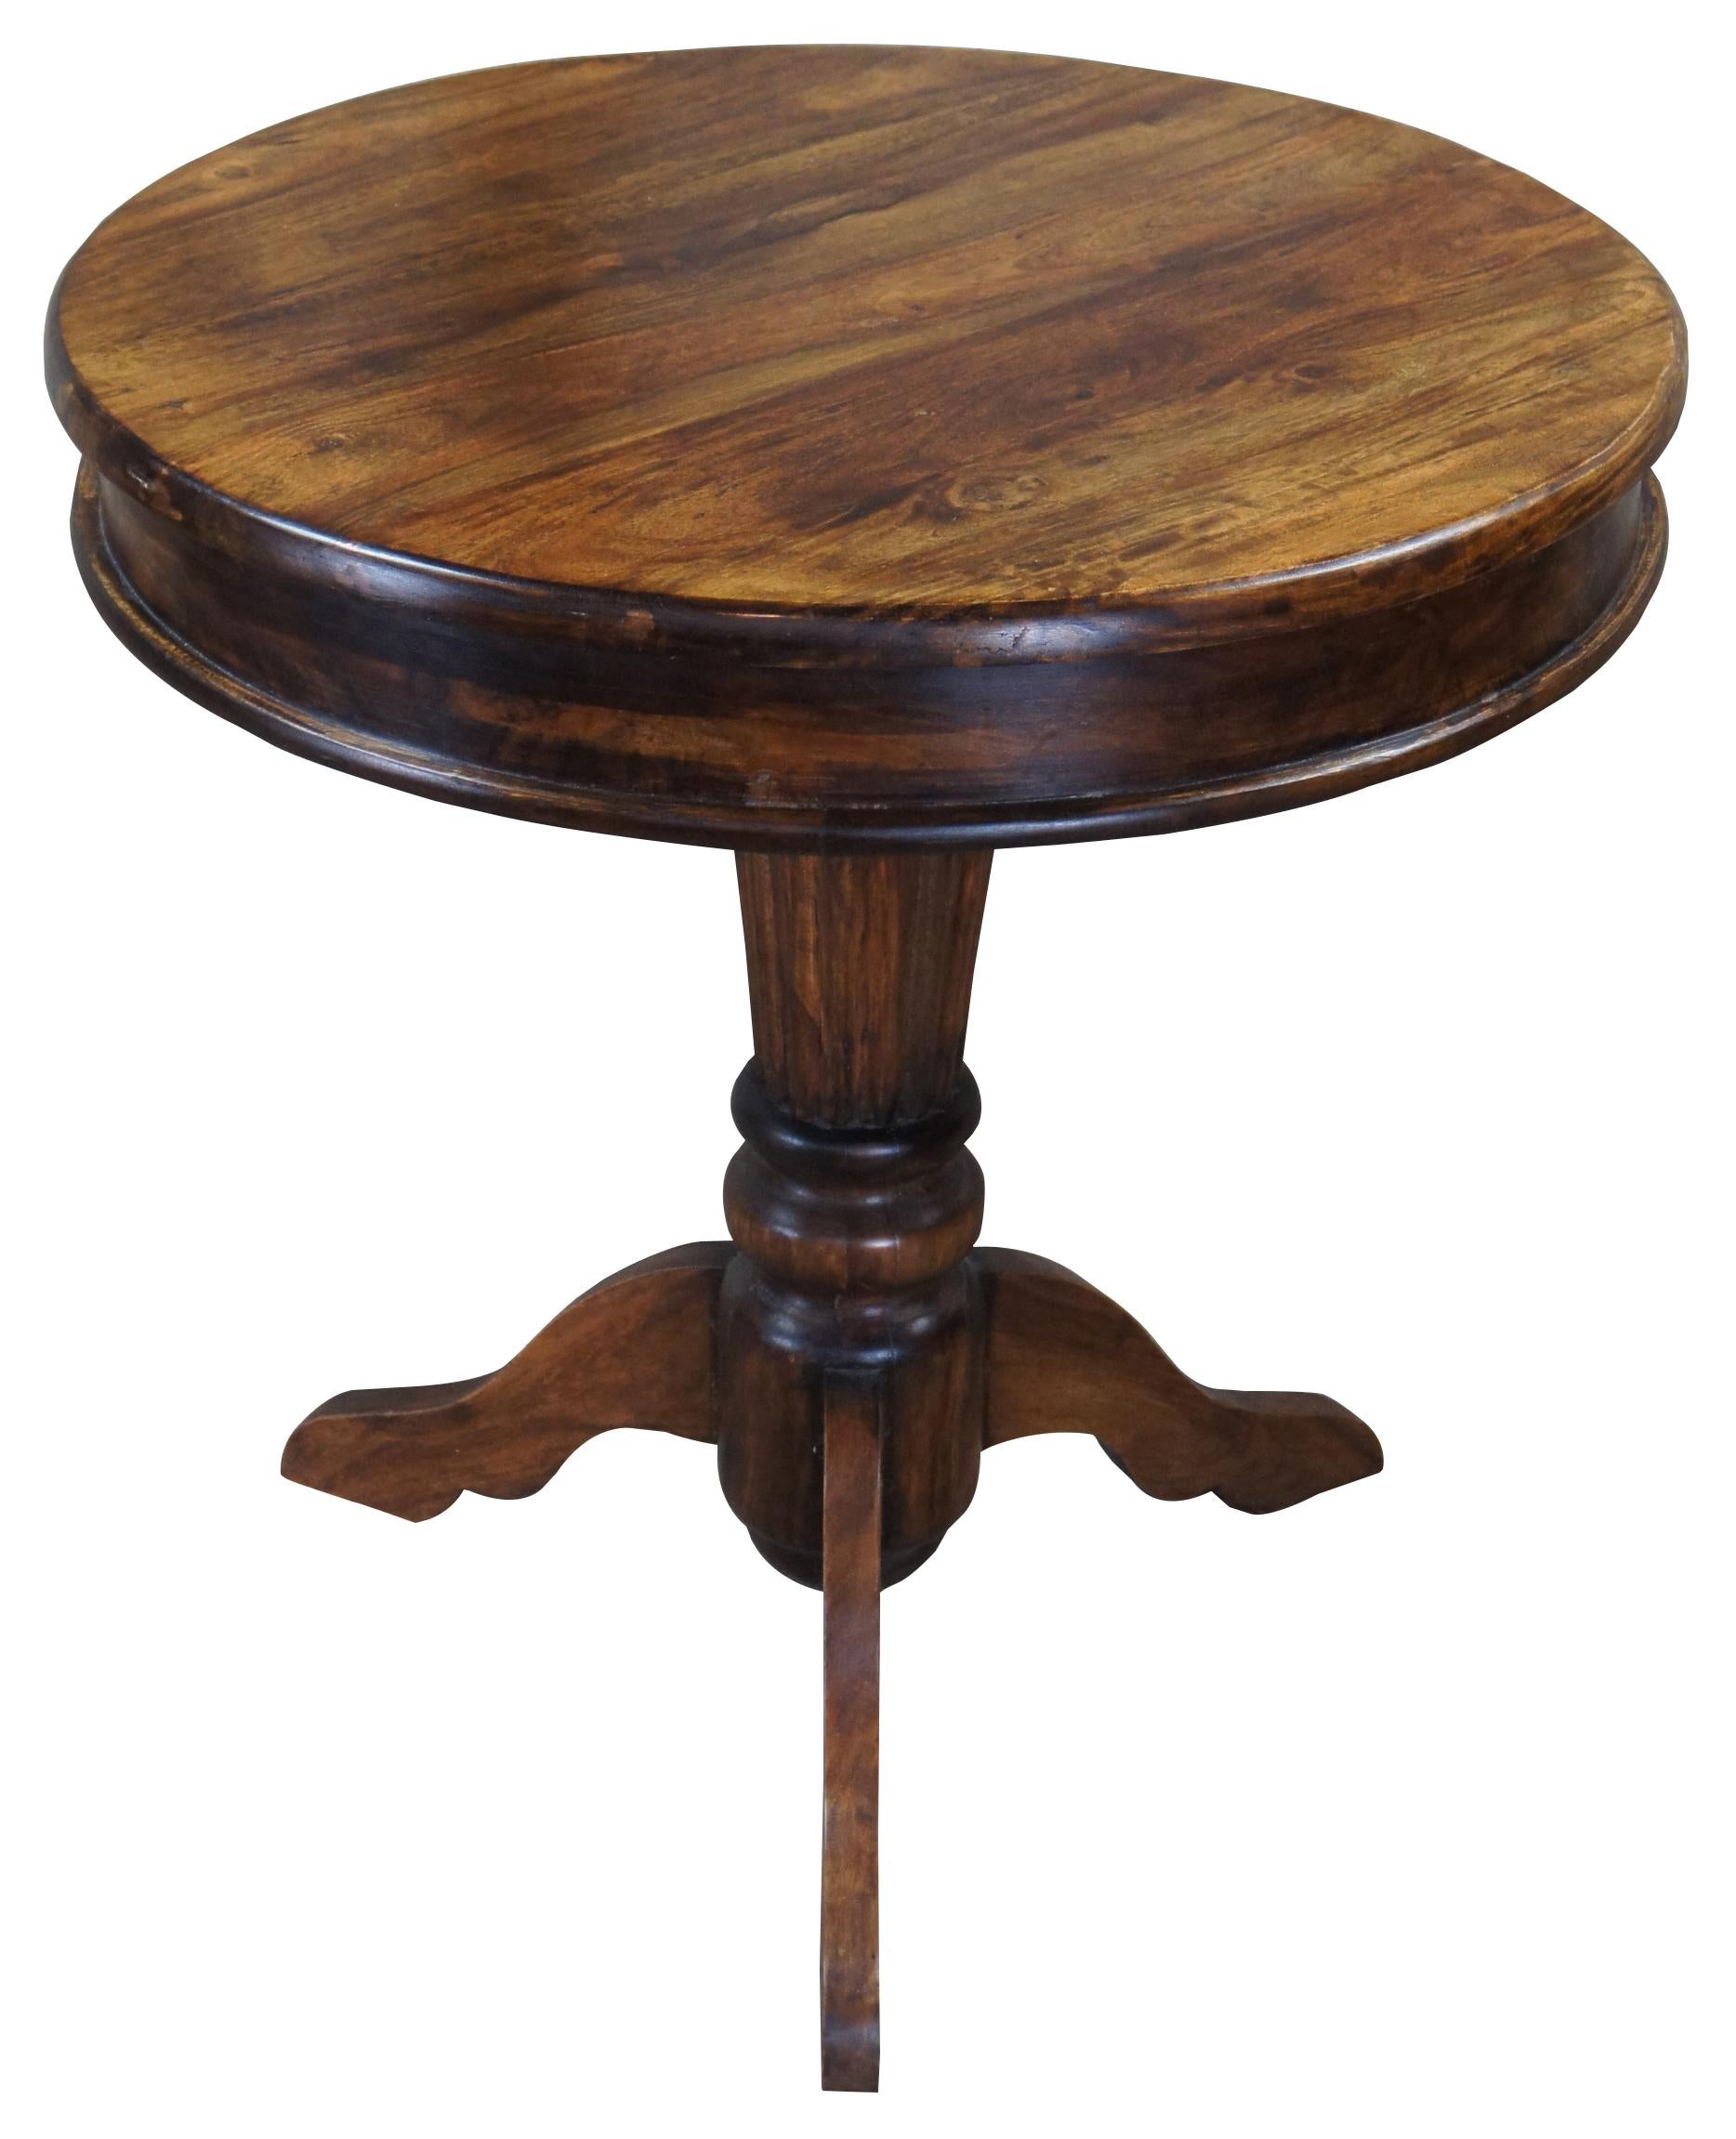 Traditional drum table. Made from mahogany with round top over fluted column and tri-leg base. Measure: 30